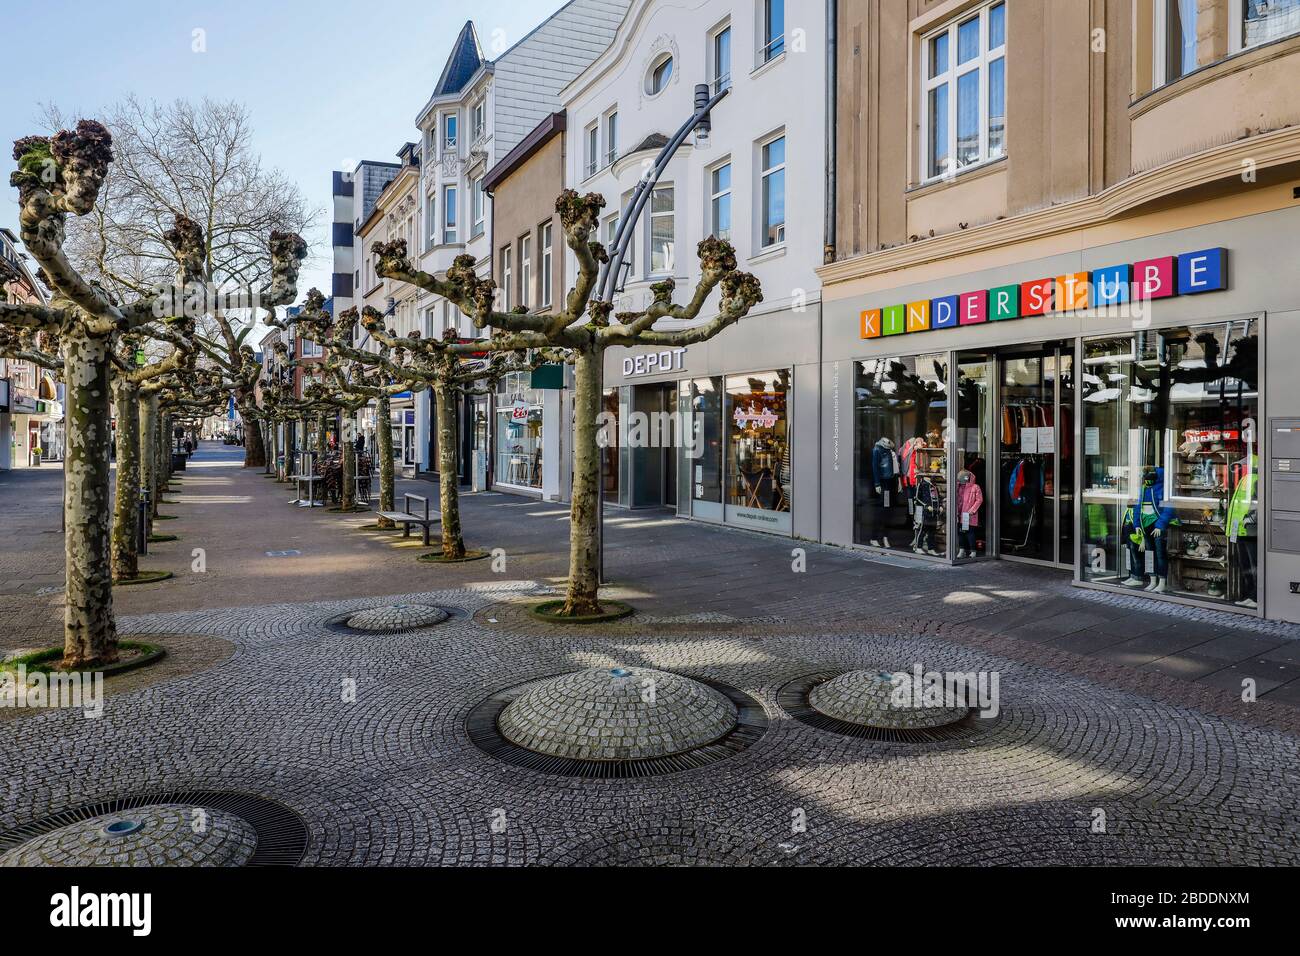 23.03.2020, Viersen, North Rhine-Westphalia, Germany - Contact ban due to corona pandemic, on Monday deserted shopping street with closed shops in the Stock Photo